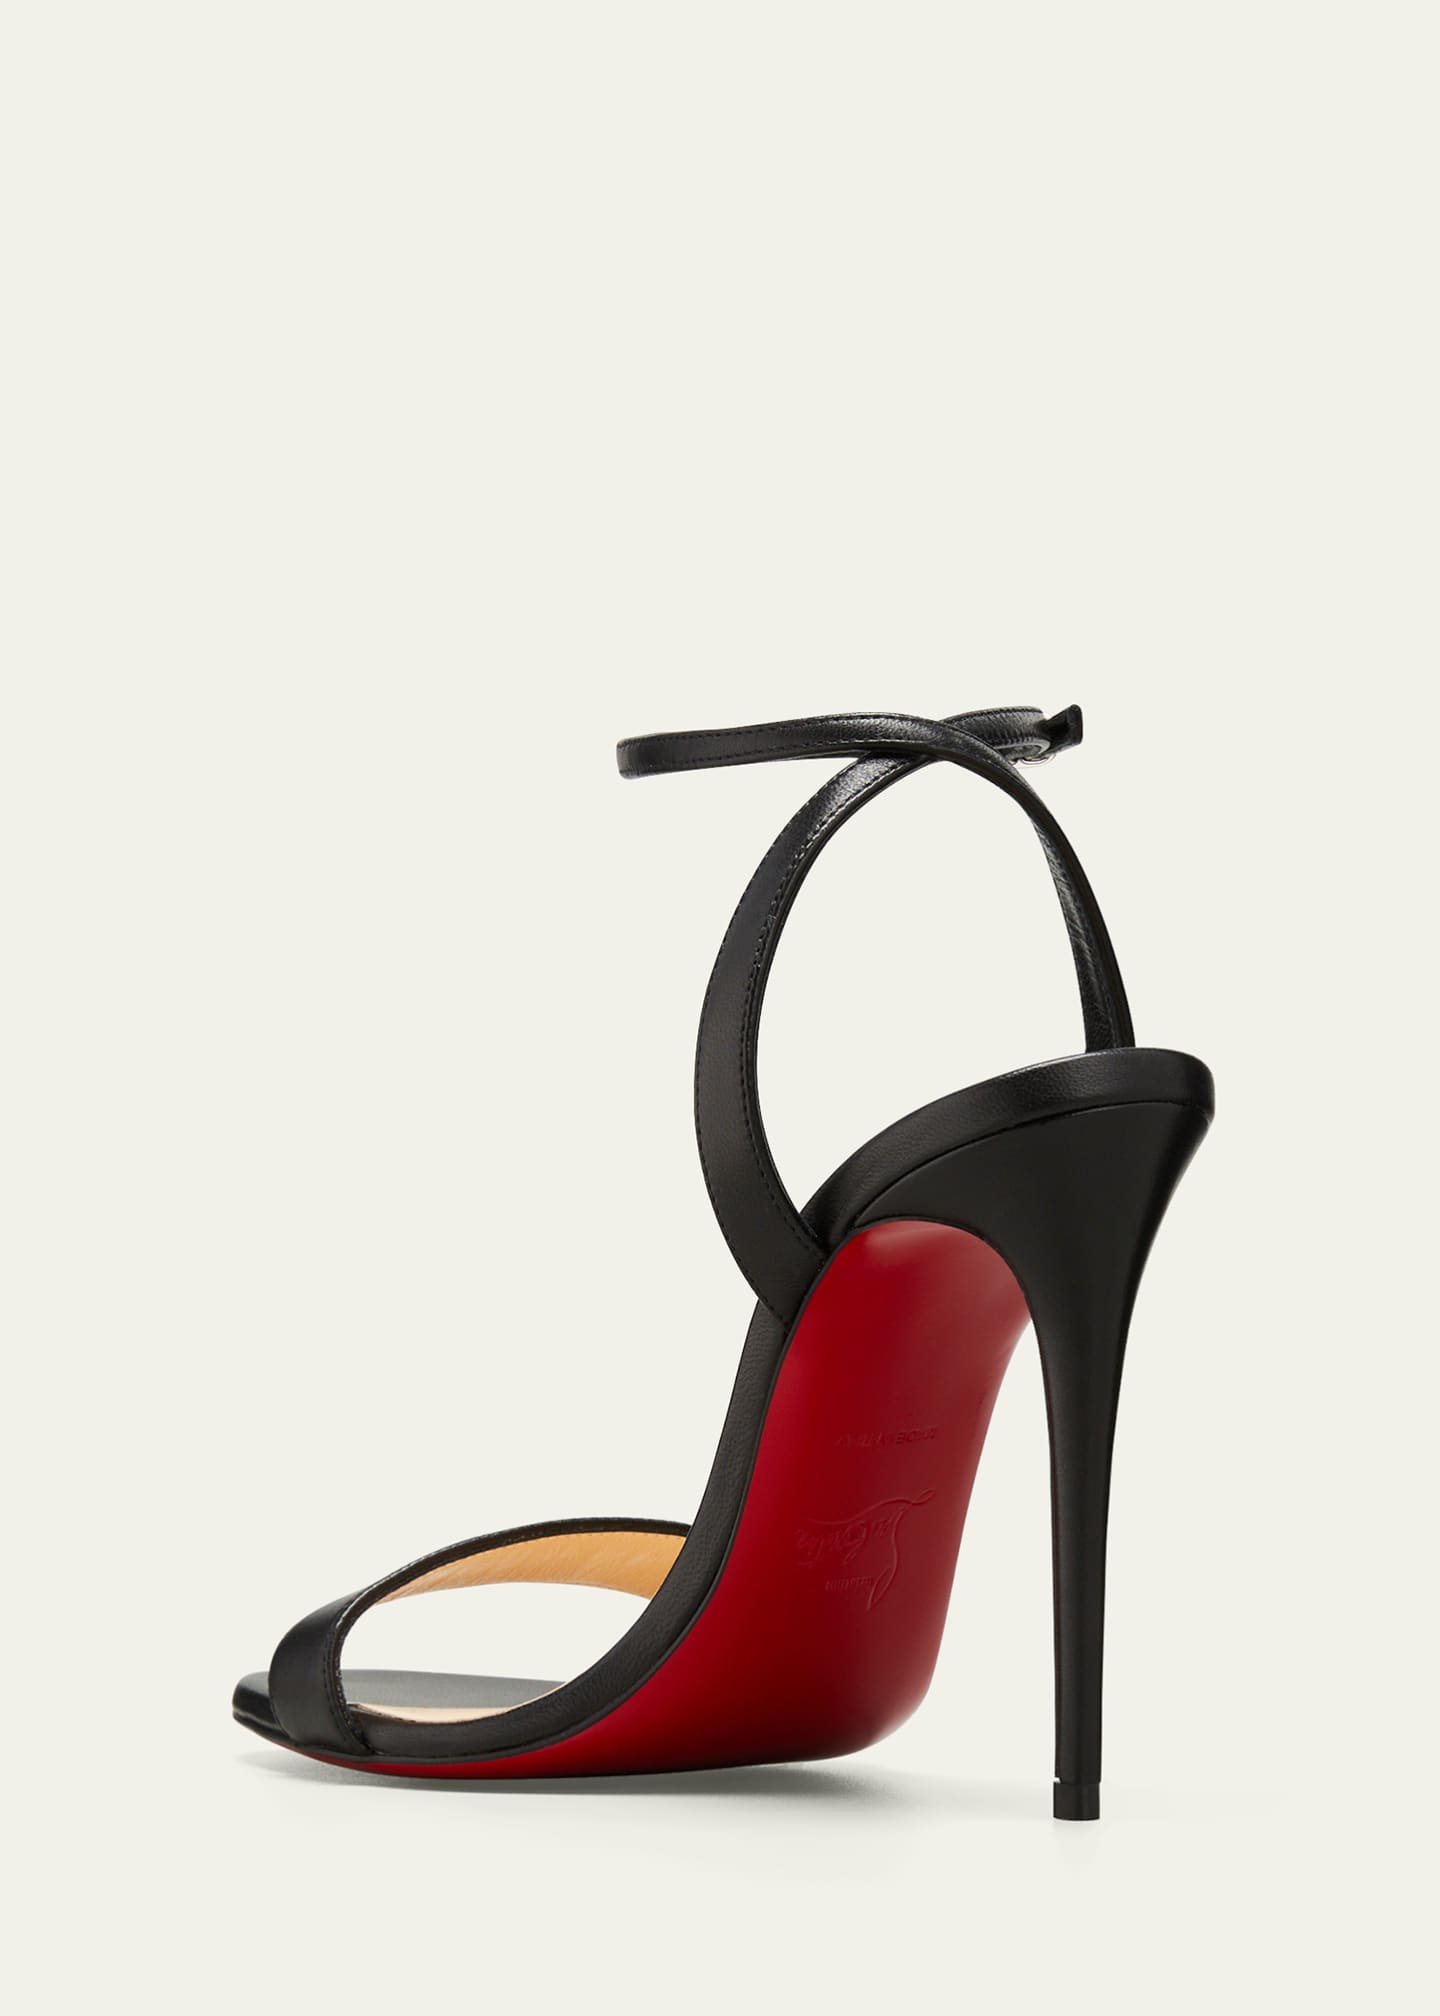 Christian Louboutin Women's Red Sandals